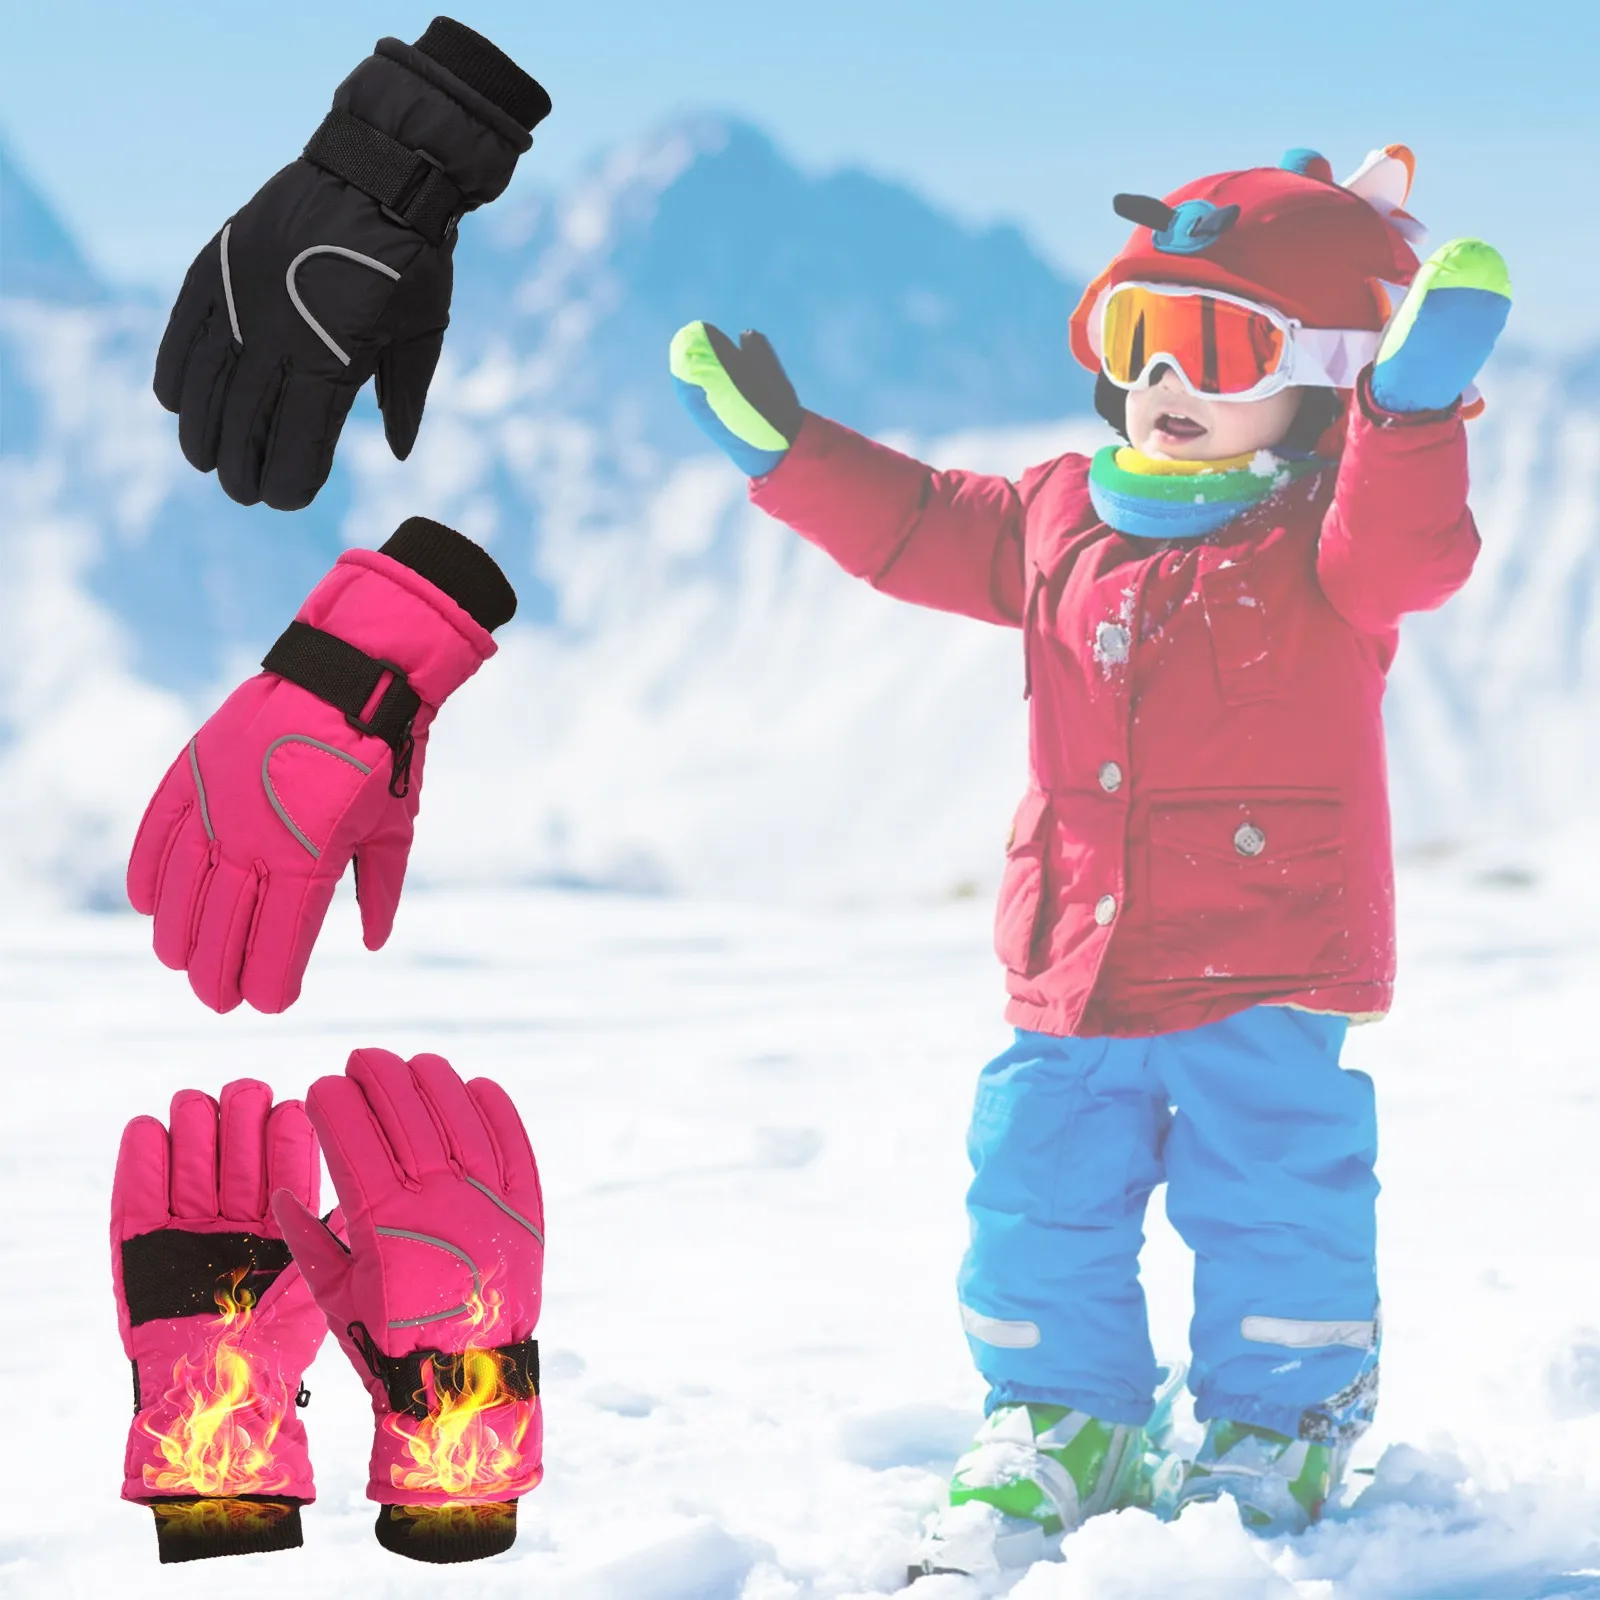 

Winter Cycling Mitten Outdoor Kids Boys Girls Snow Skating Snowboarding Windproof Warm Ski Gloves Suit For 4-8 Years Old guantes